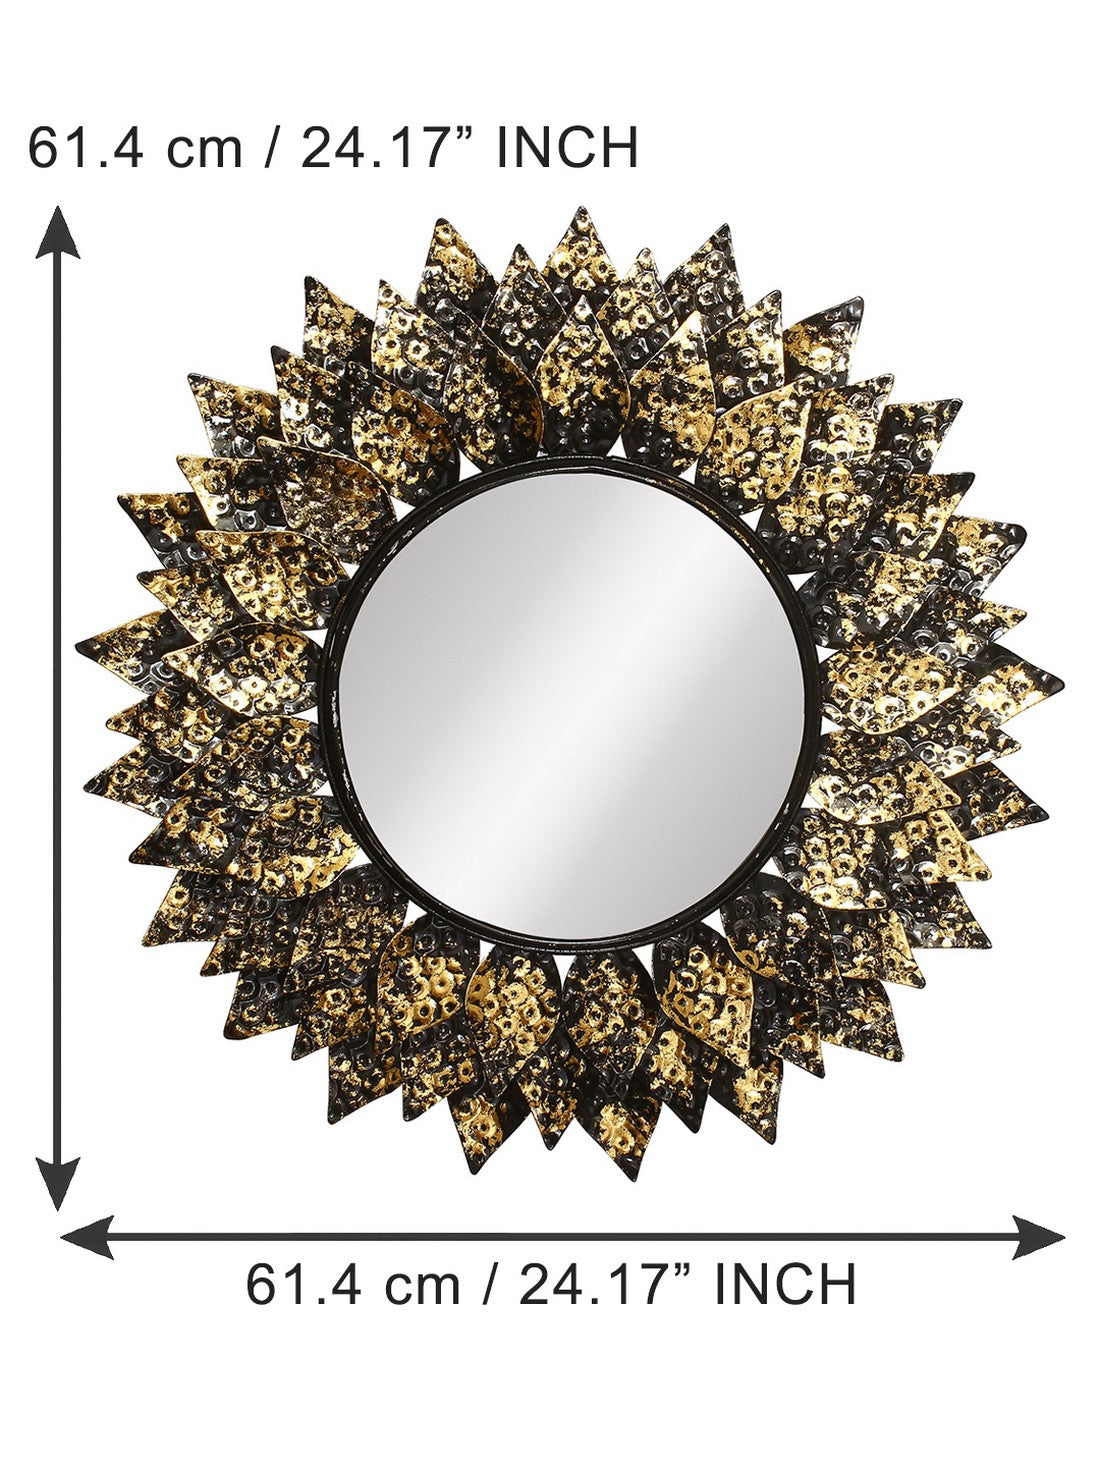 Golden and Black Decorative Metal Handcarved Wall Mirror 2